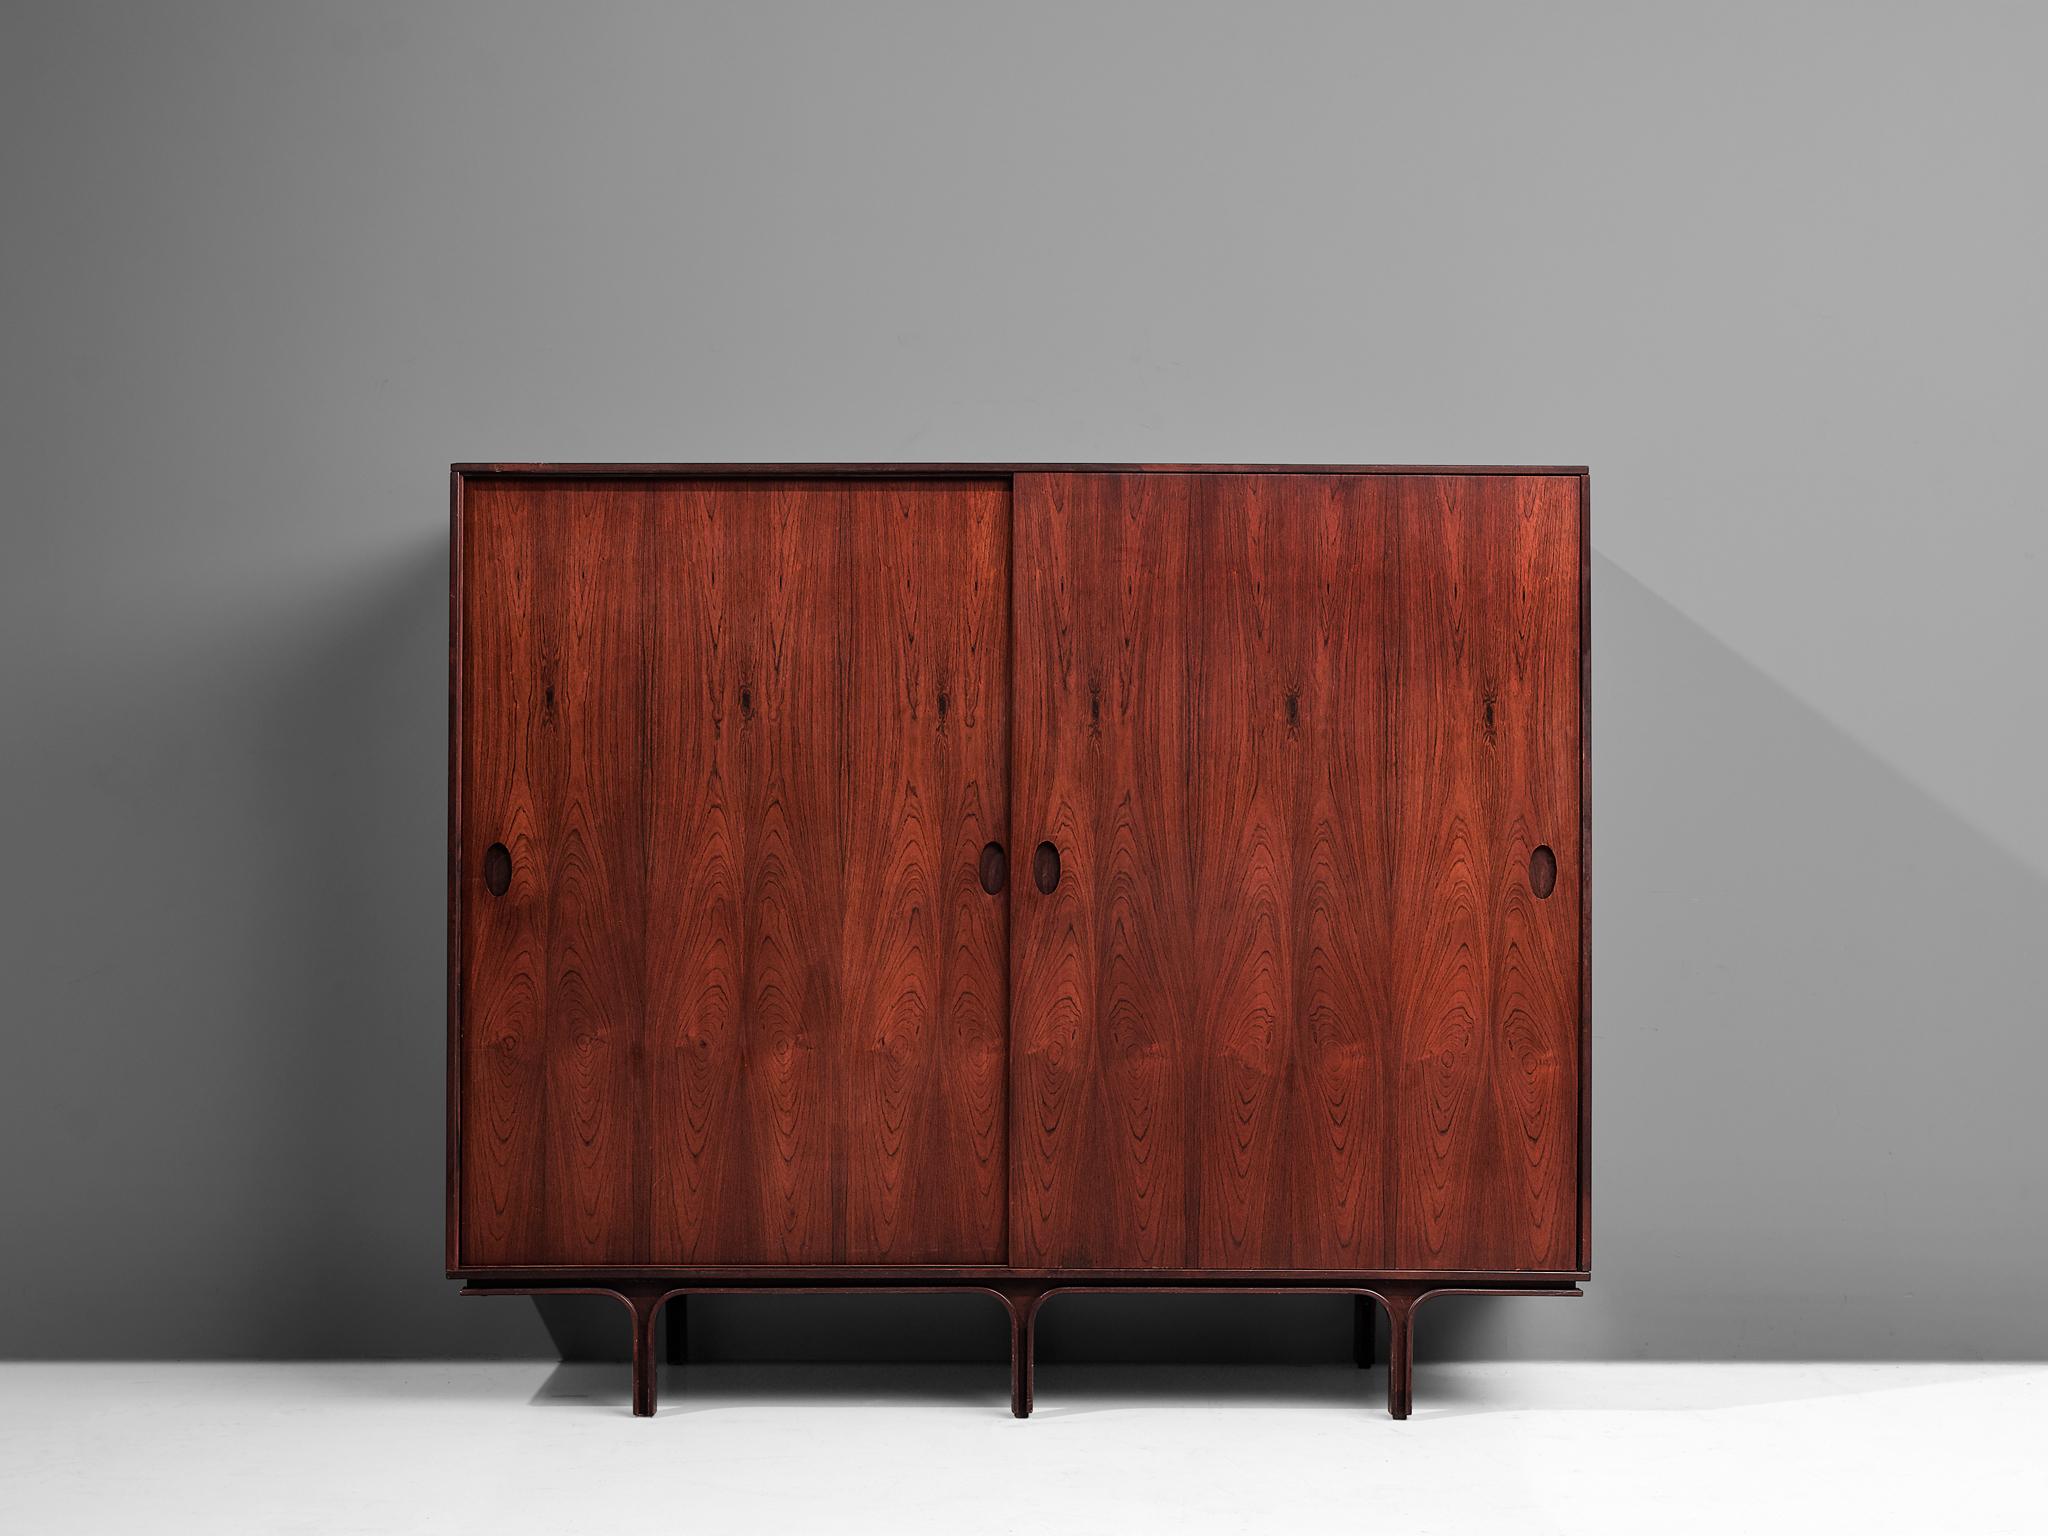 Gianfranco Frattini for Bernini, cabinet, rosewood, Italy, 1950s

Robust yet elegant cabinet designed by Gianfranco Frattini for Bernini in the 1950s. The cabinet features beautiful bookmatched rosewood veneer, showing the warm color of the wood